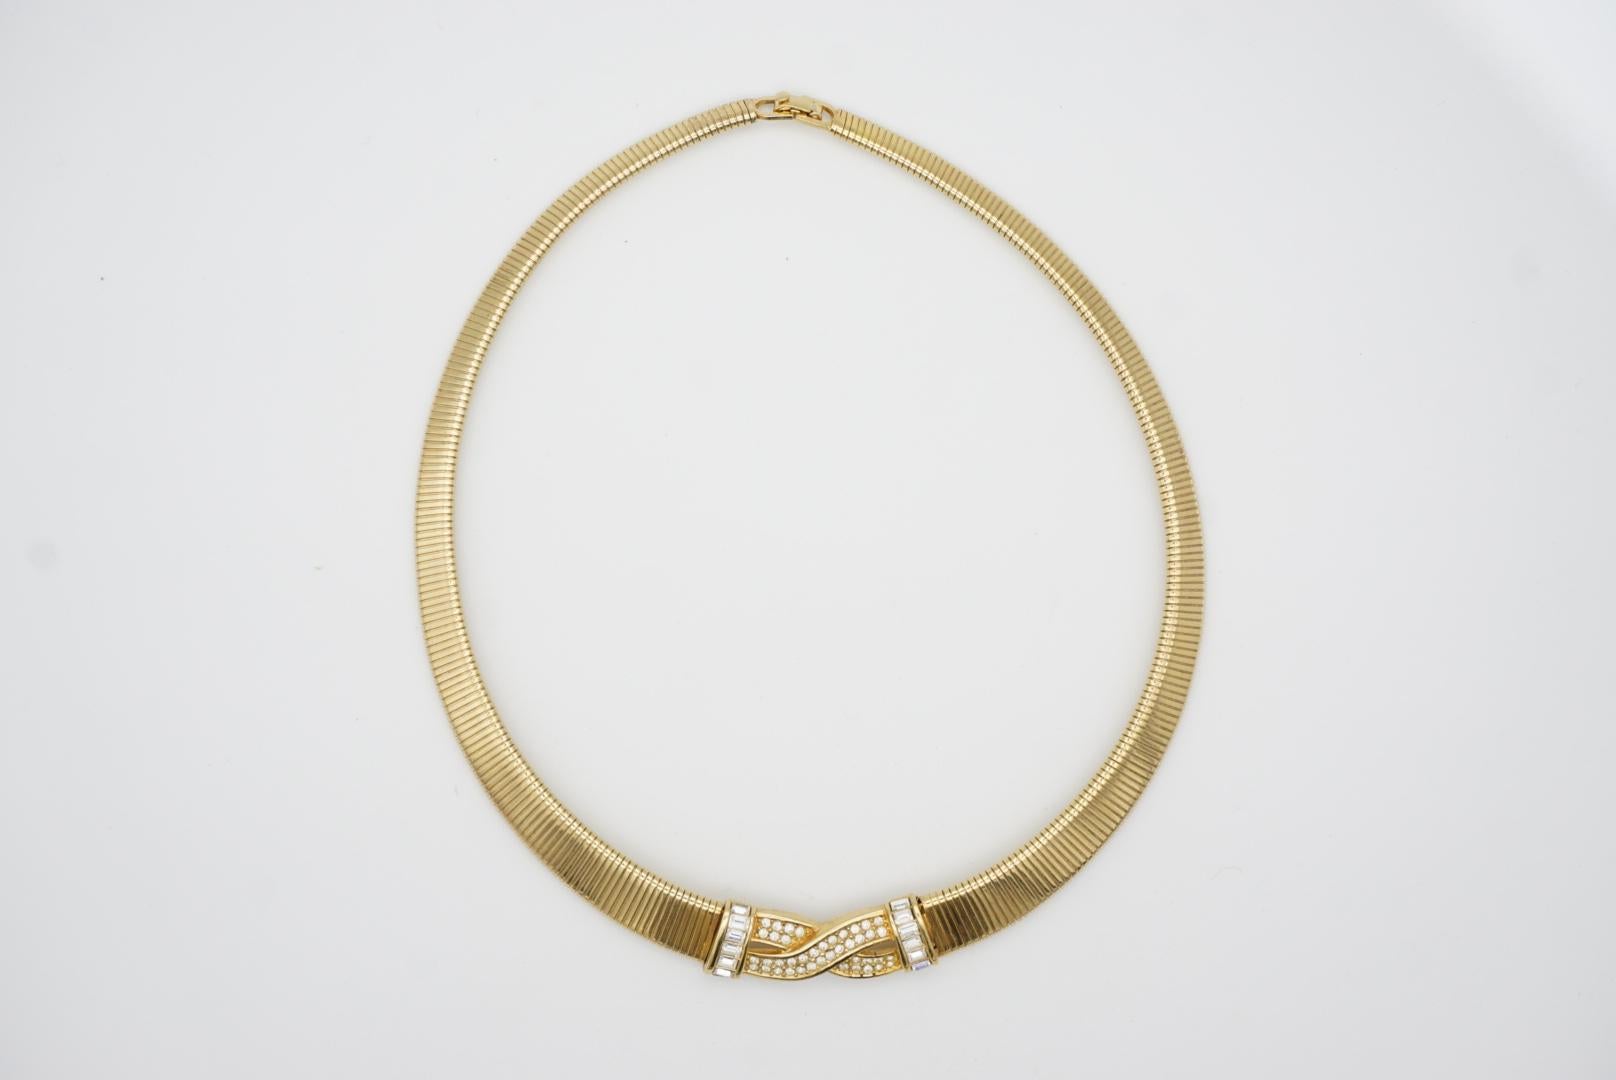 Christian Dior Vintage 1980s Omega Ribbed Interlock Crystal Collar Gold Necklace In Excellent Condition For Sale In Wokingham, England